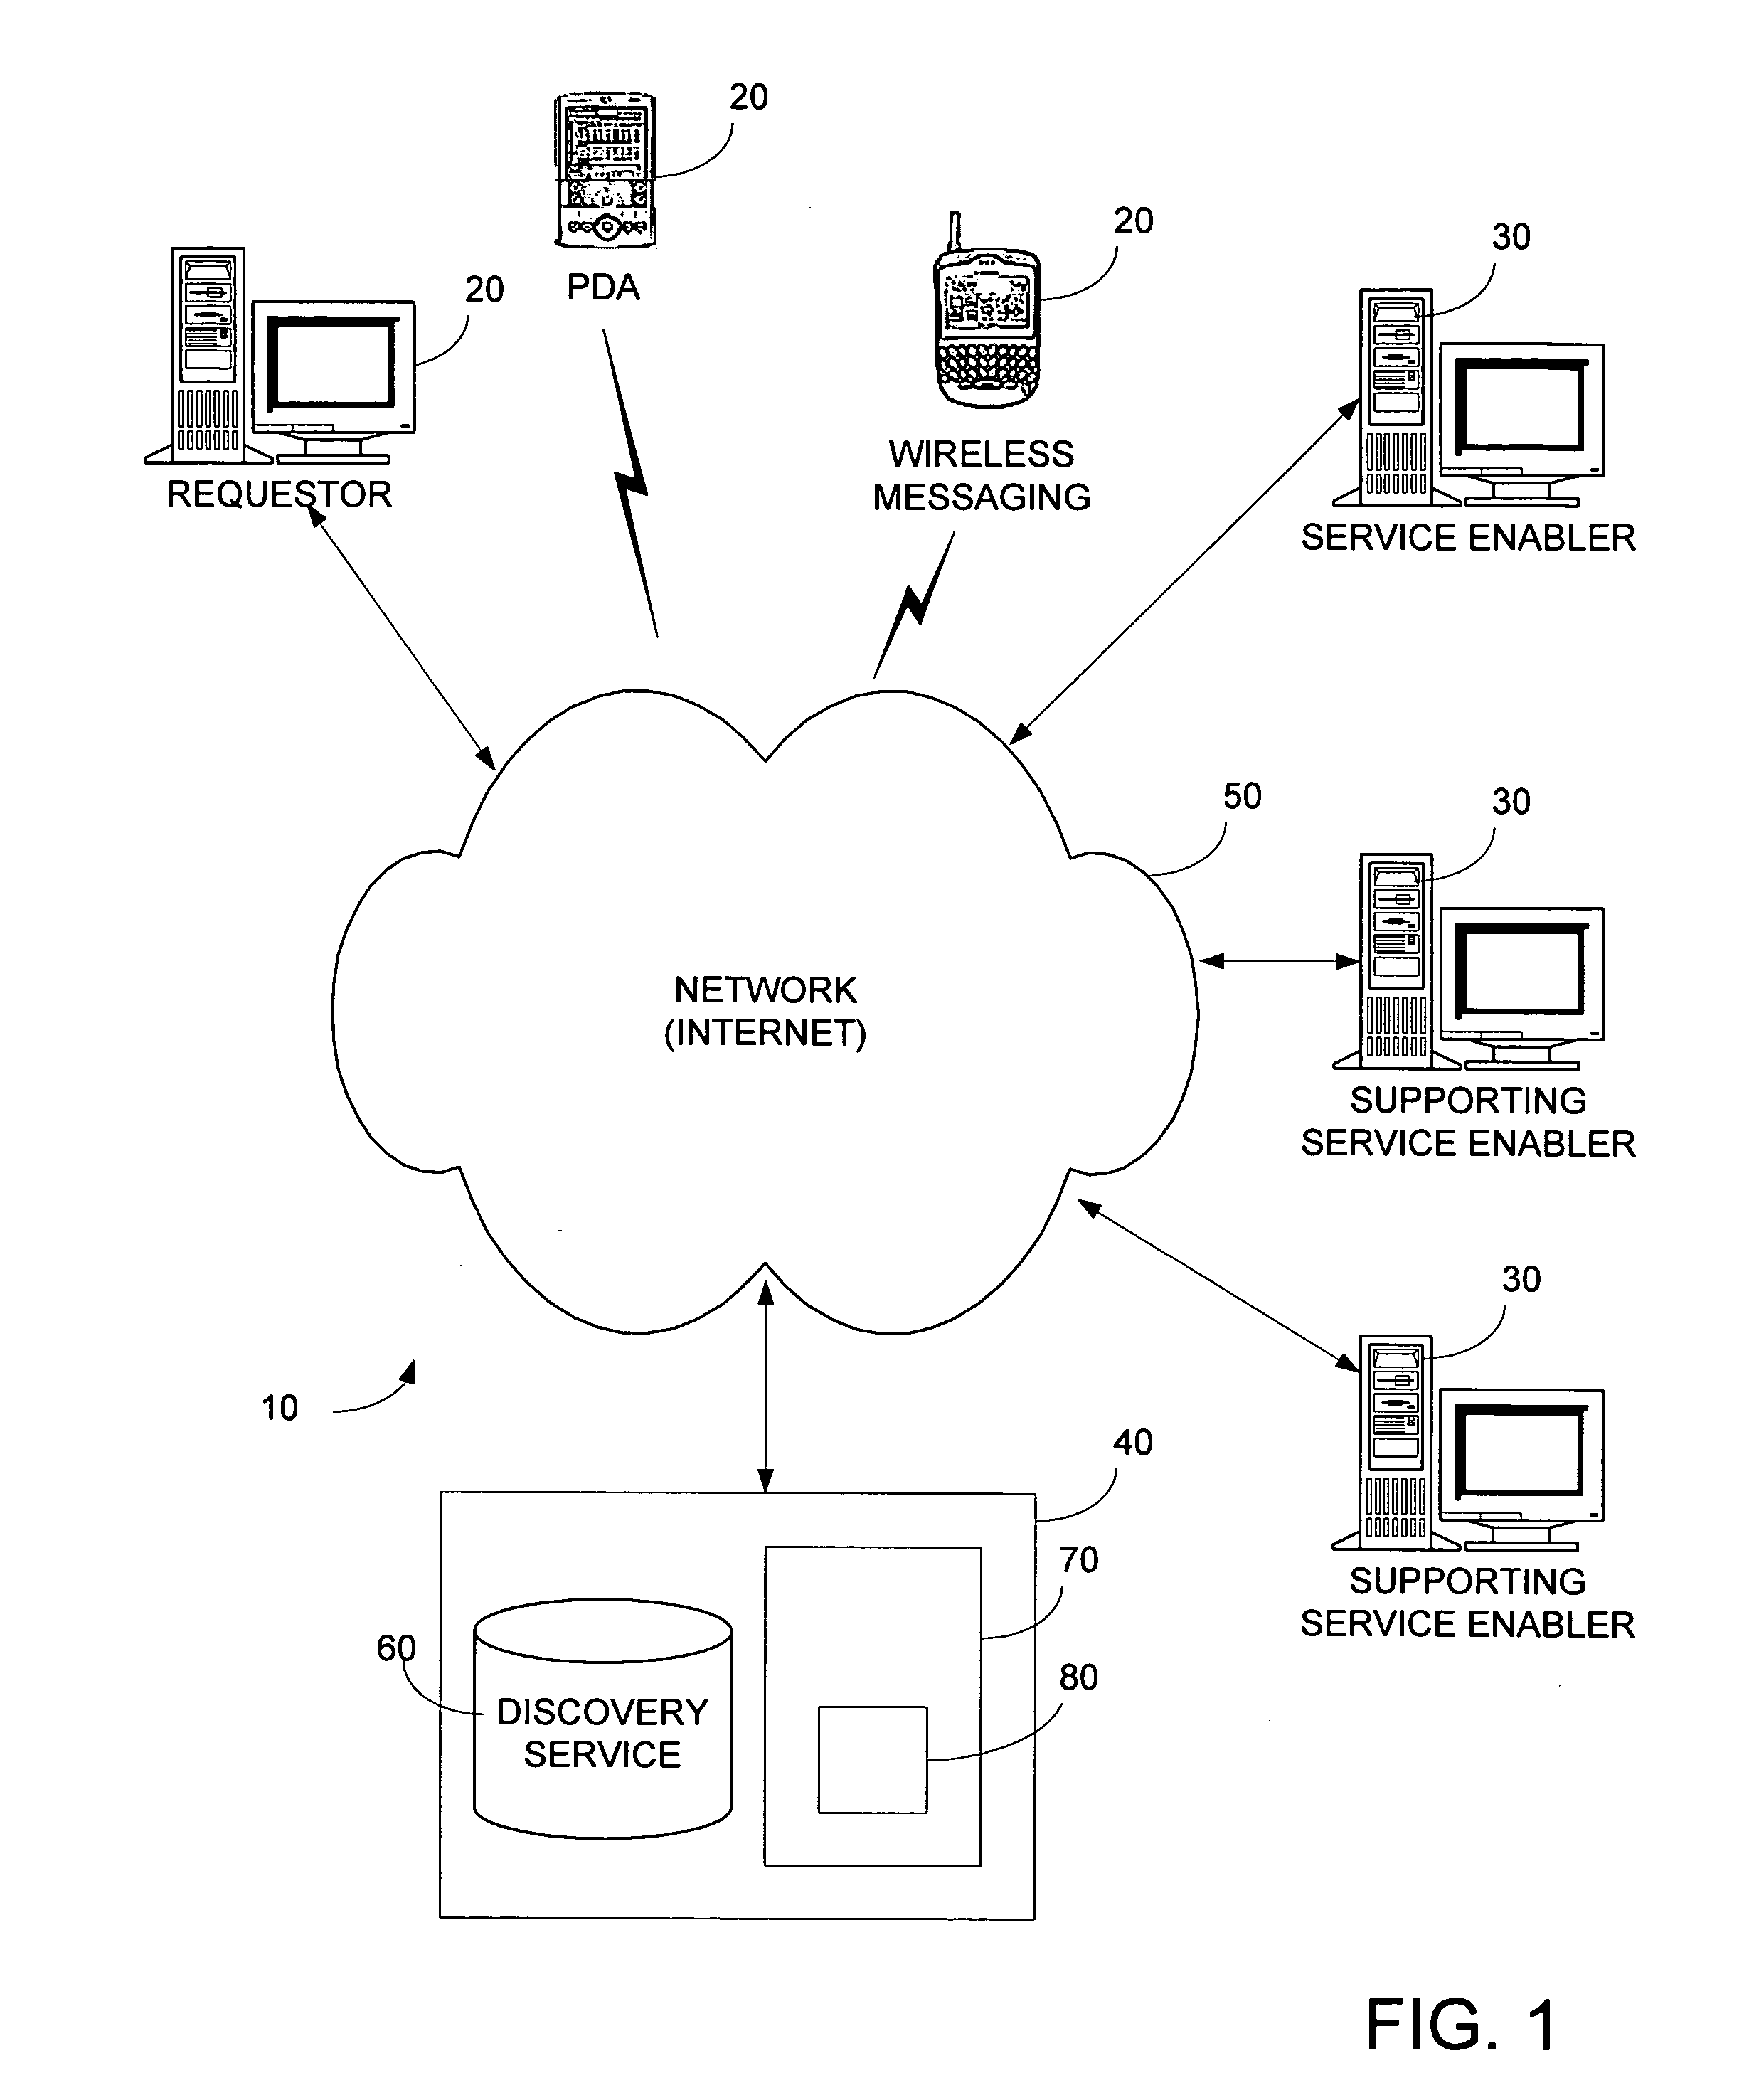 Method and apparatus for supporting service enablers via service request handholding